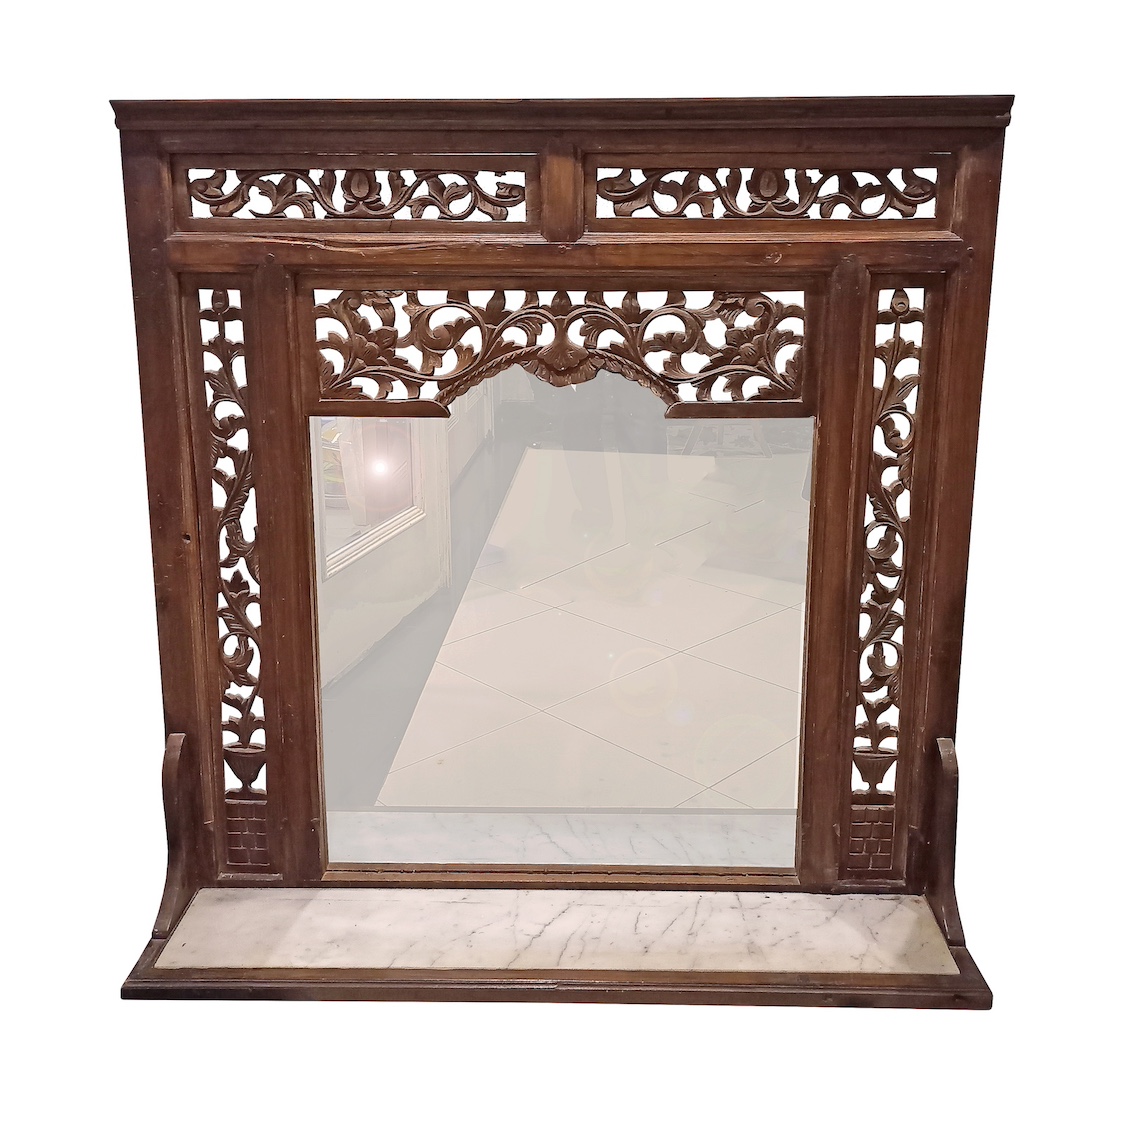 A carved teak wall mirror frame with marble inset